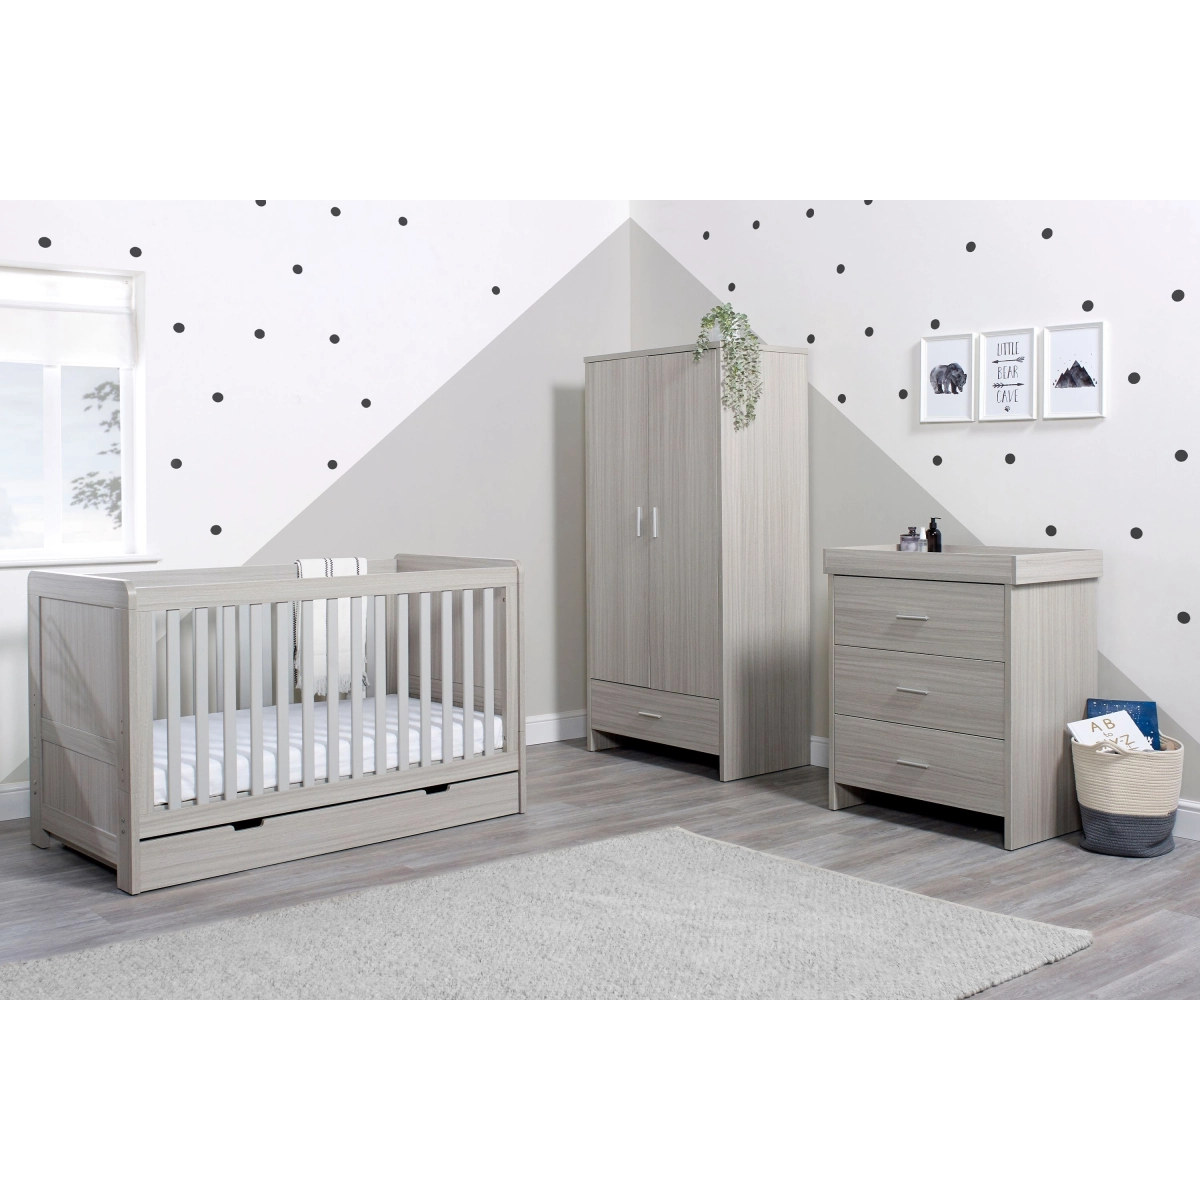 Image of Ickle Bubba Pembrey 3 Piece Furniture Set with Under Drawer-Ash Grey